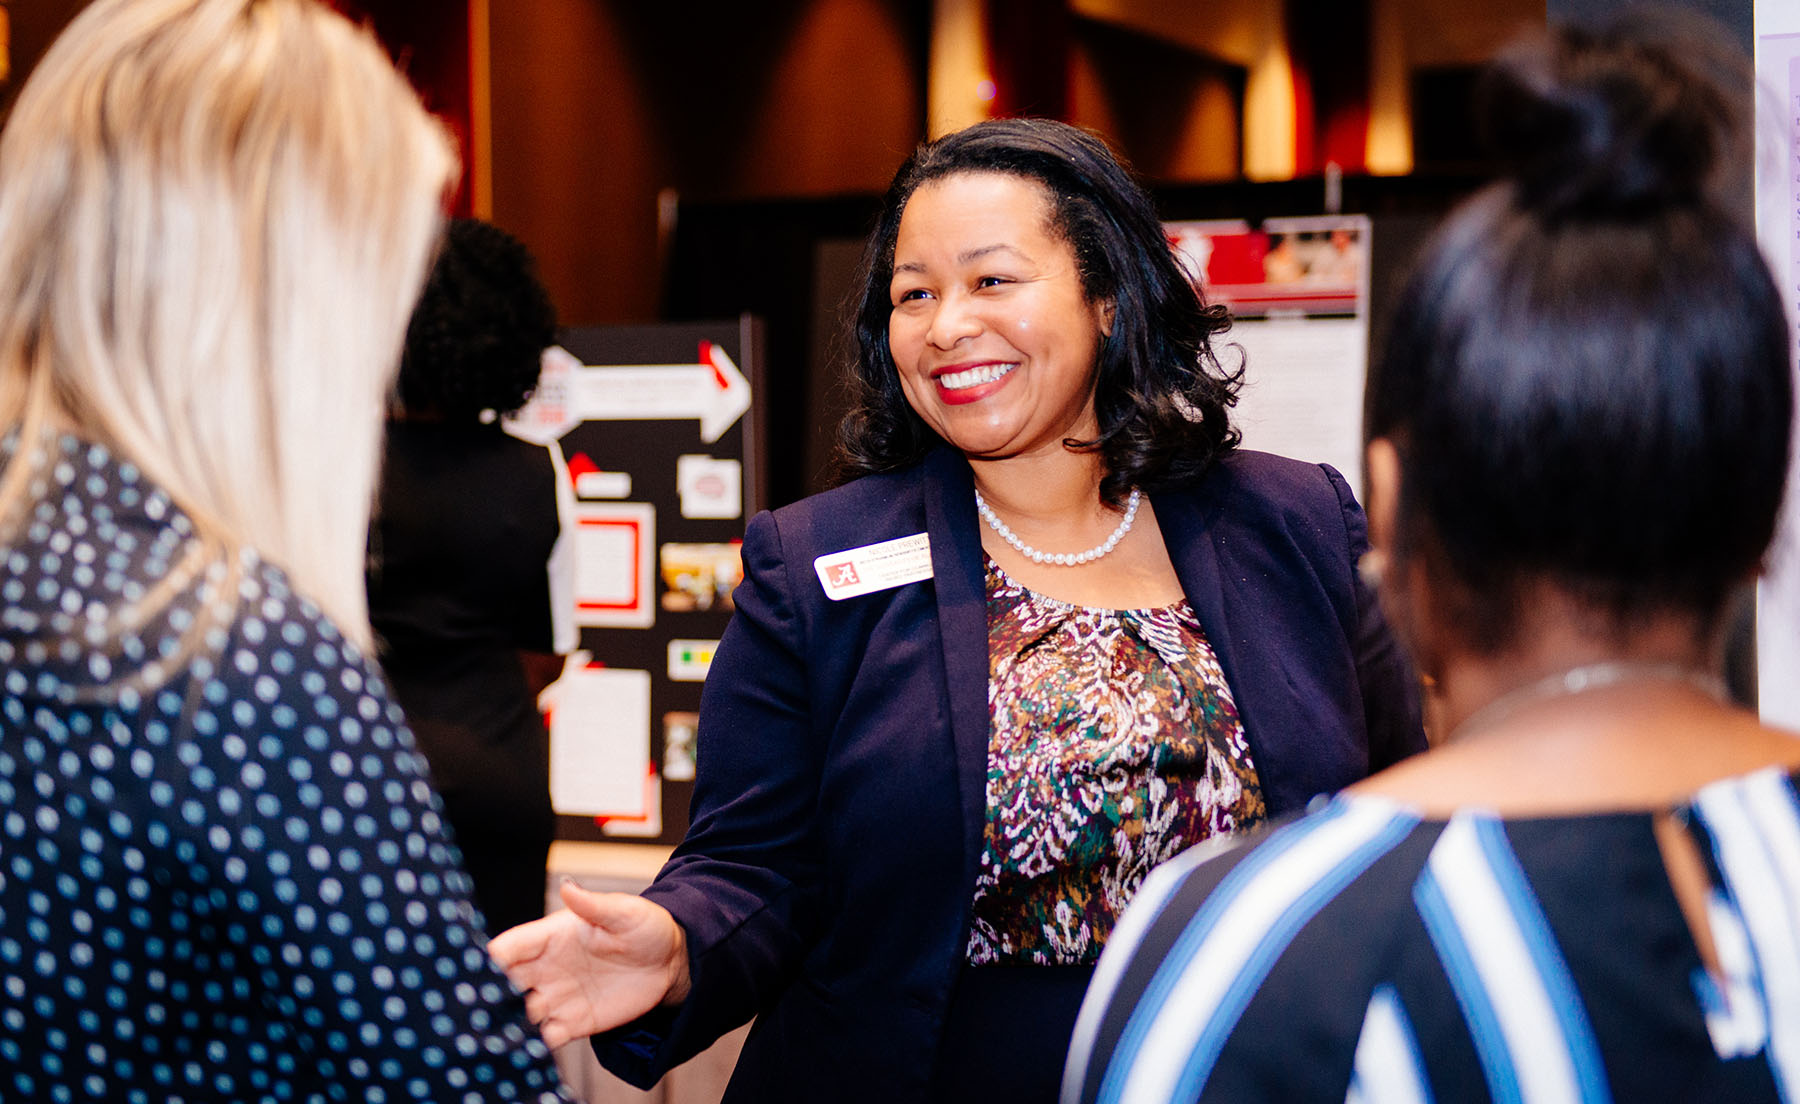 Dr. Nicole B. Prewitt and Awards Luncheon attendees admire the research posters at this year’s Awards Luncheon.